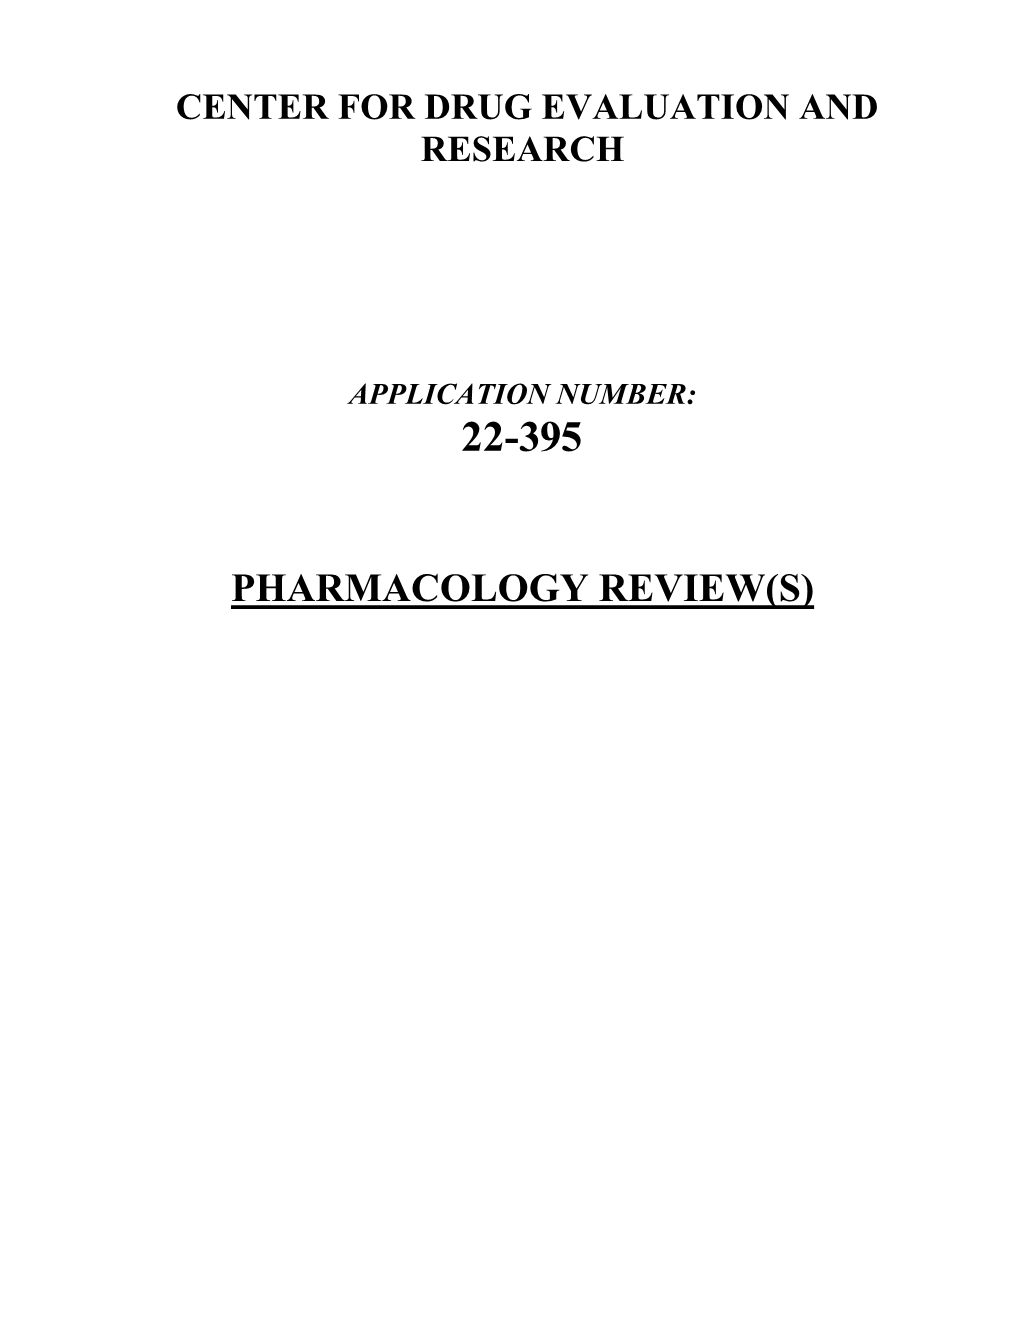 PHARMACOLOGY REVIEW(S) Reviewer: L